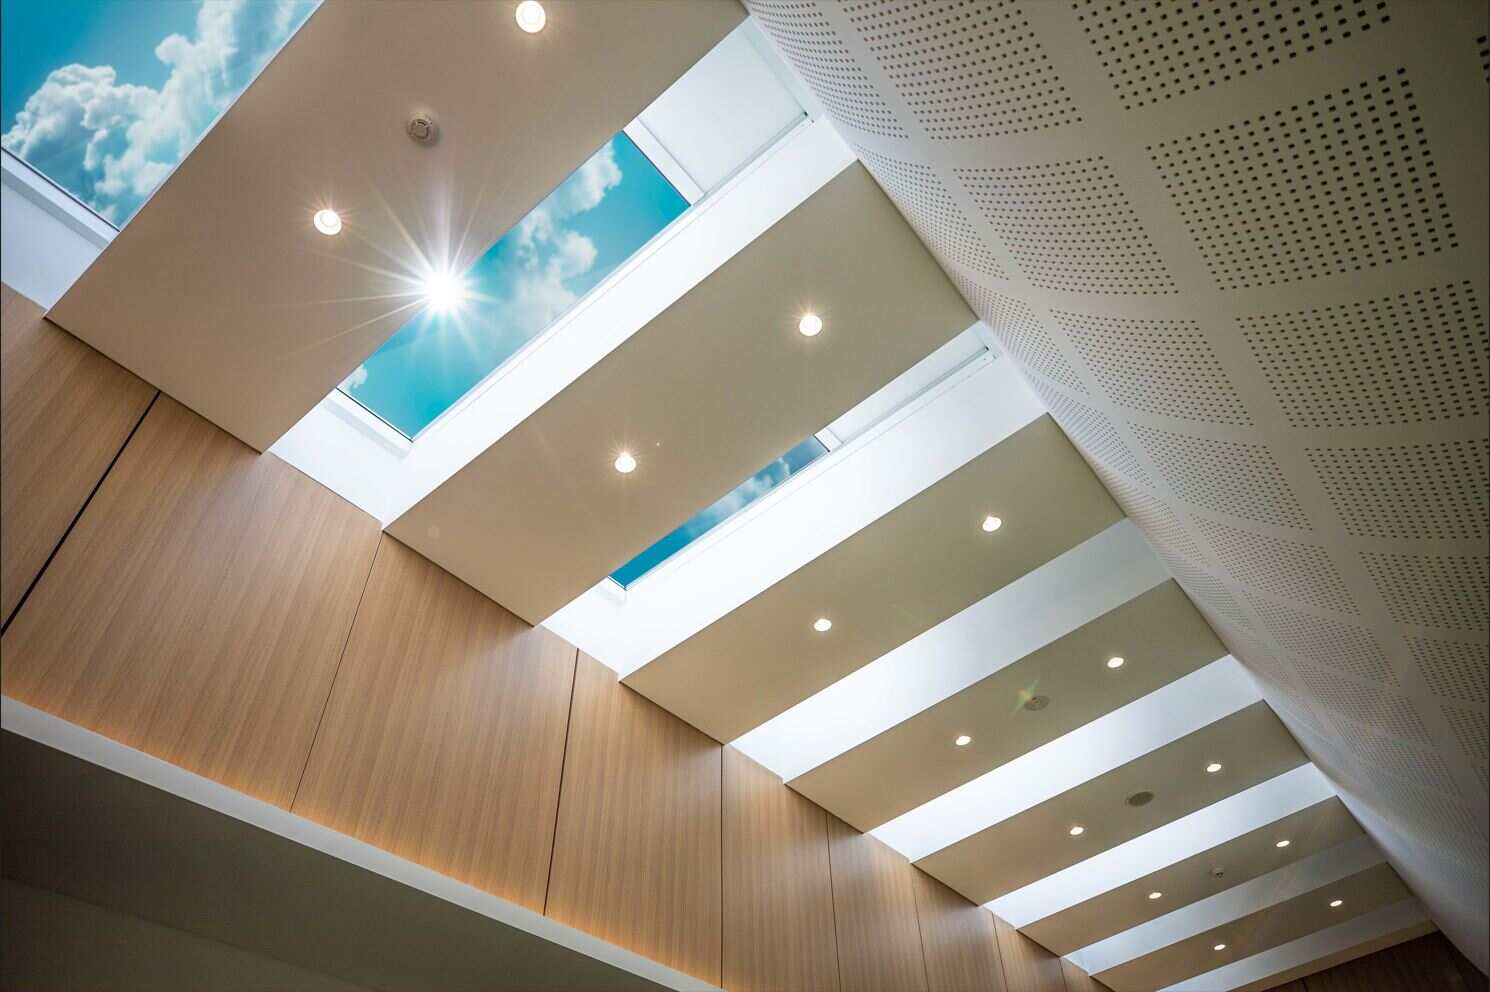 St Edmunds's College Skylights with Blinds